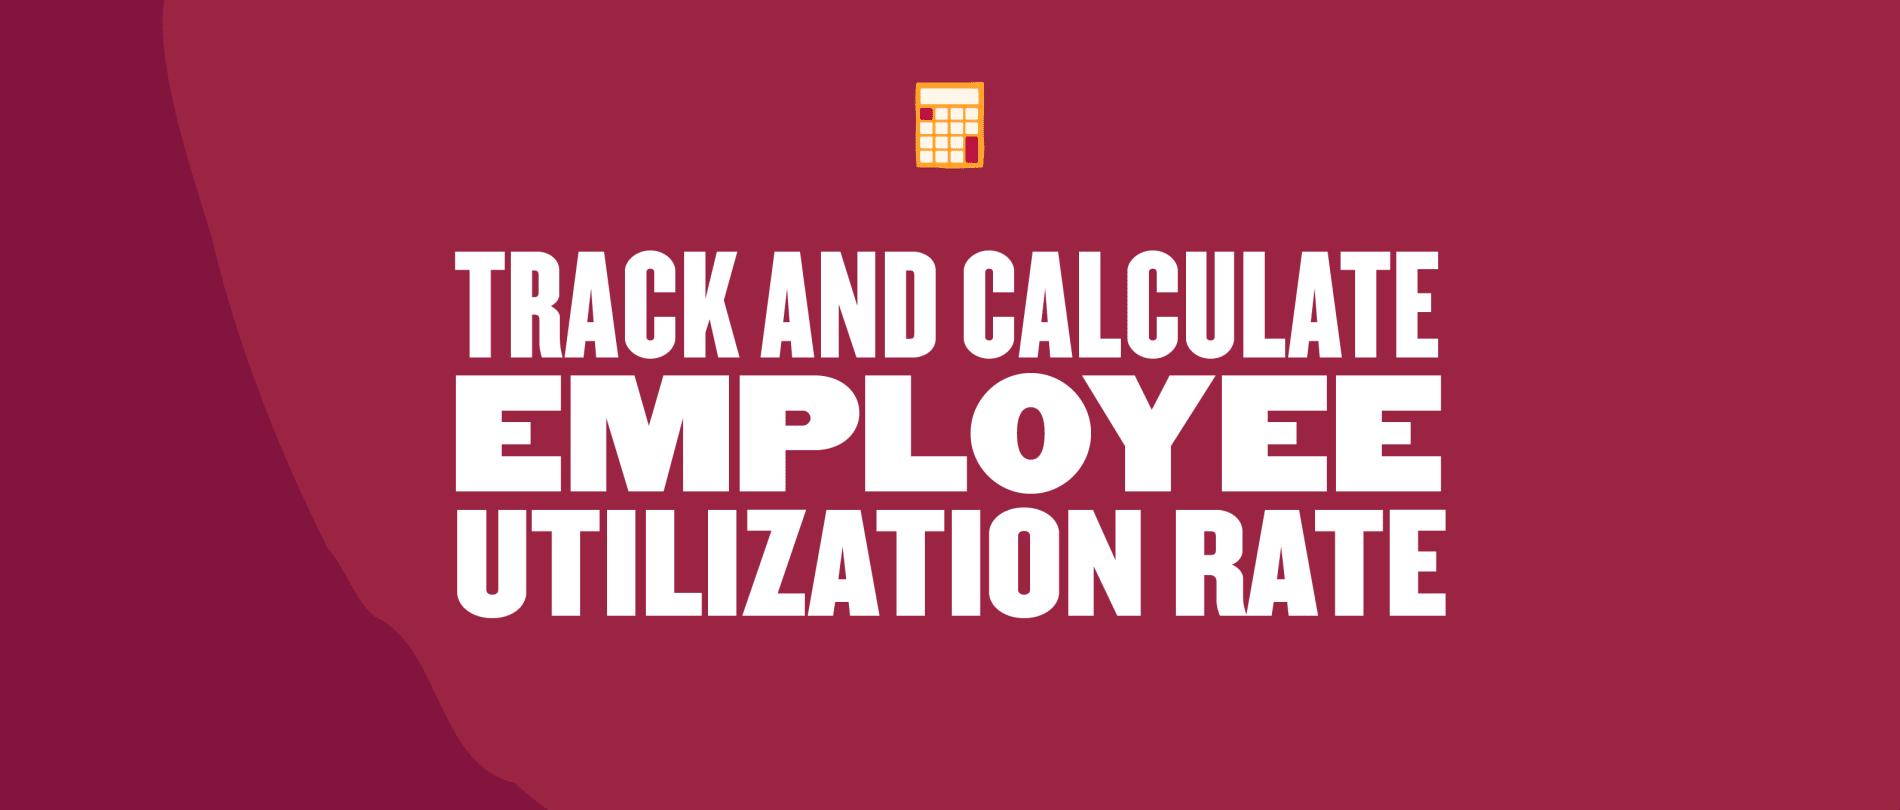 Employee Utilization Rate: How To Calculate And Track